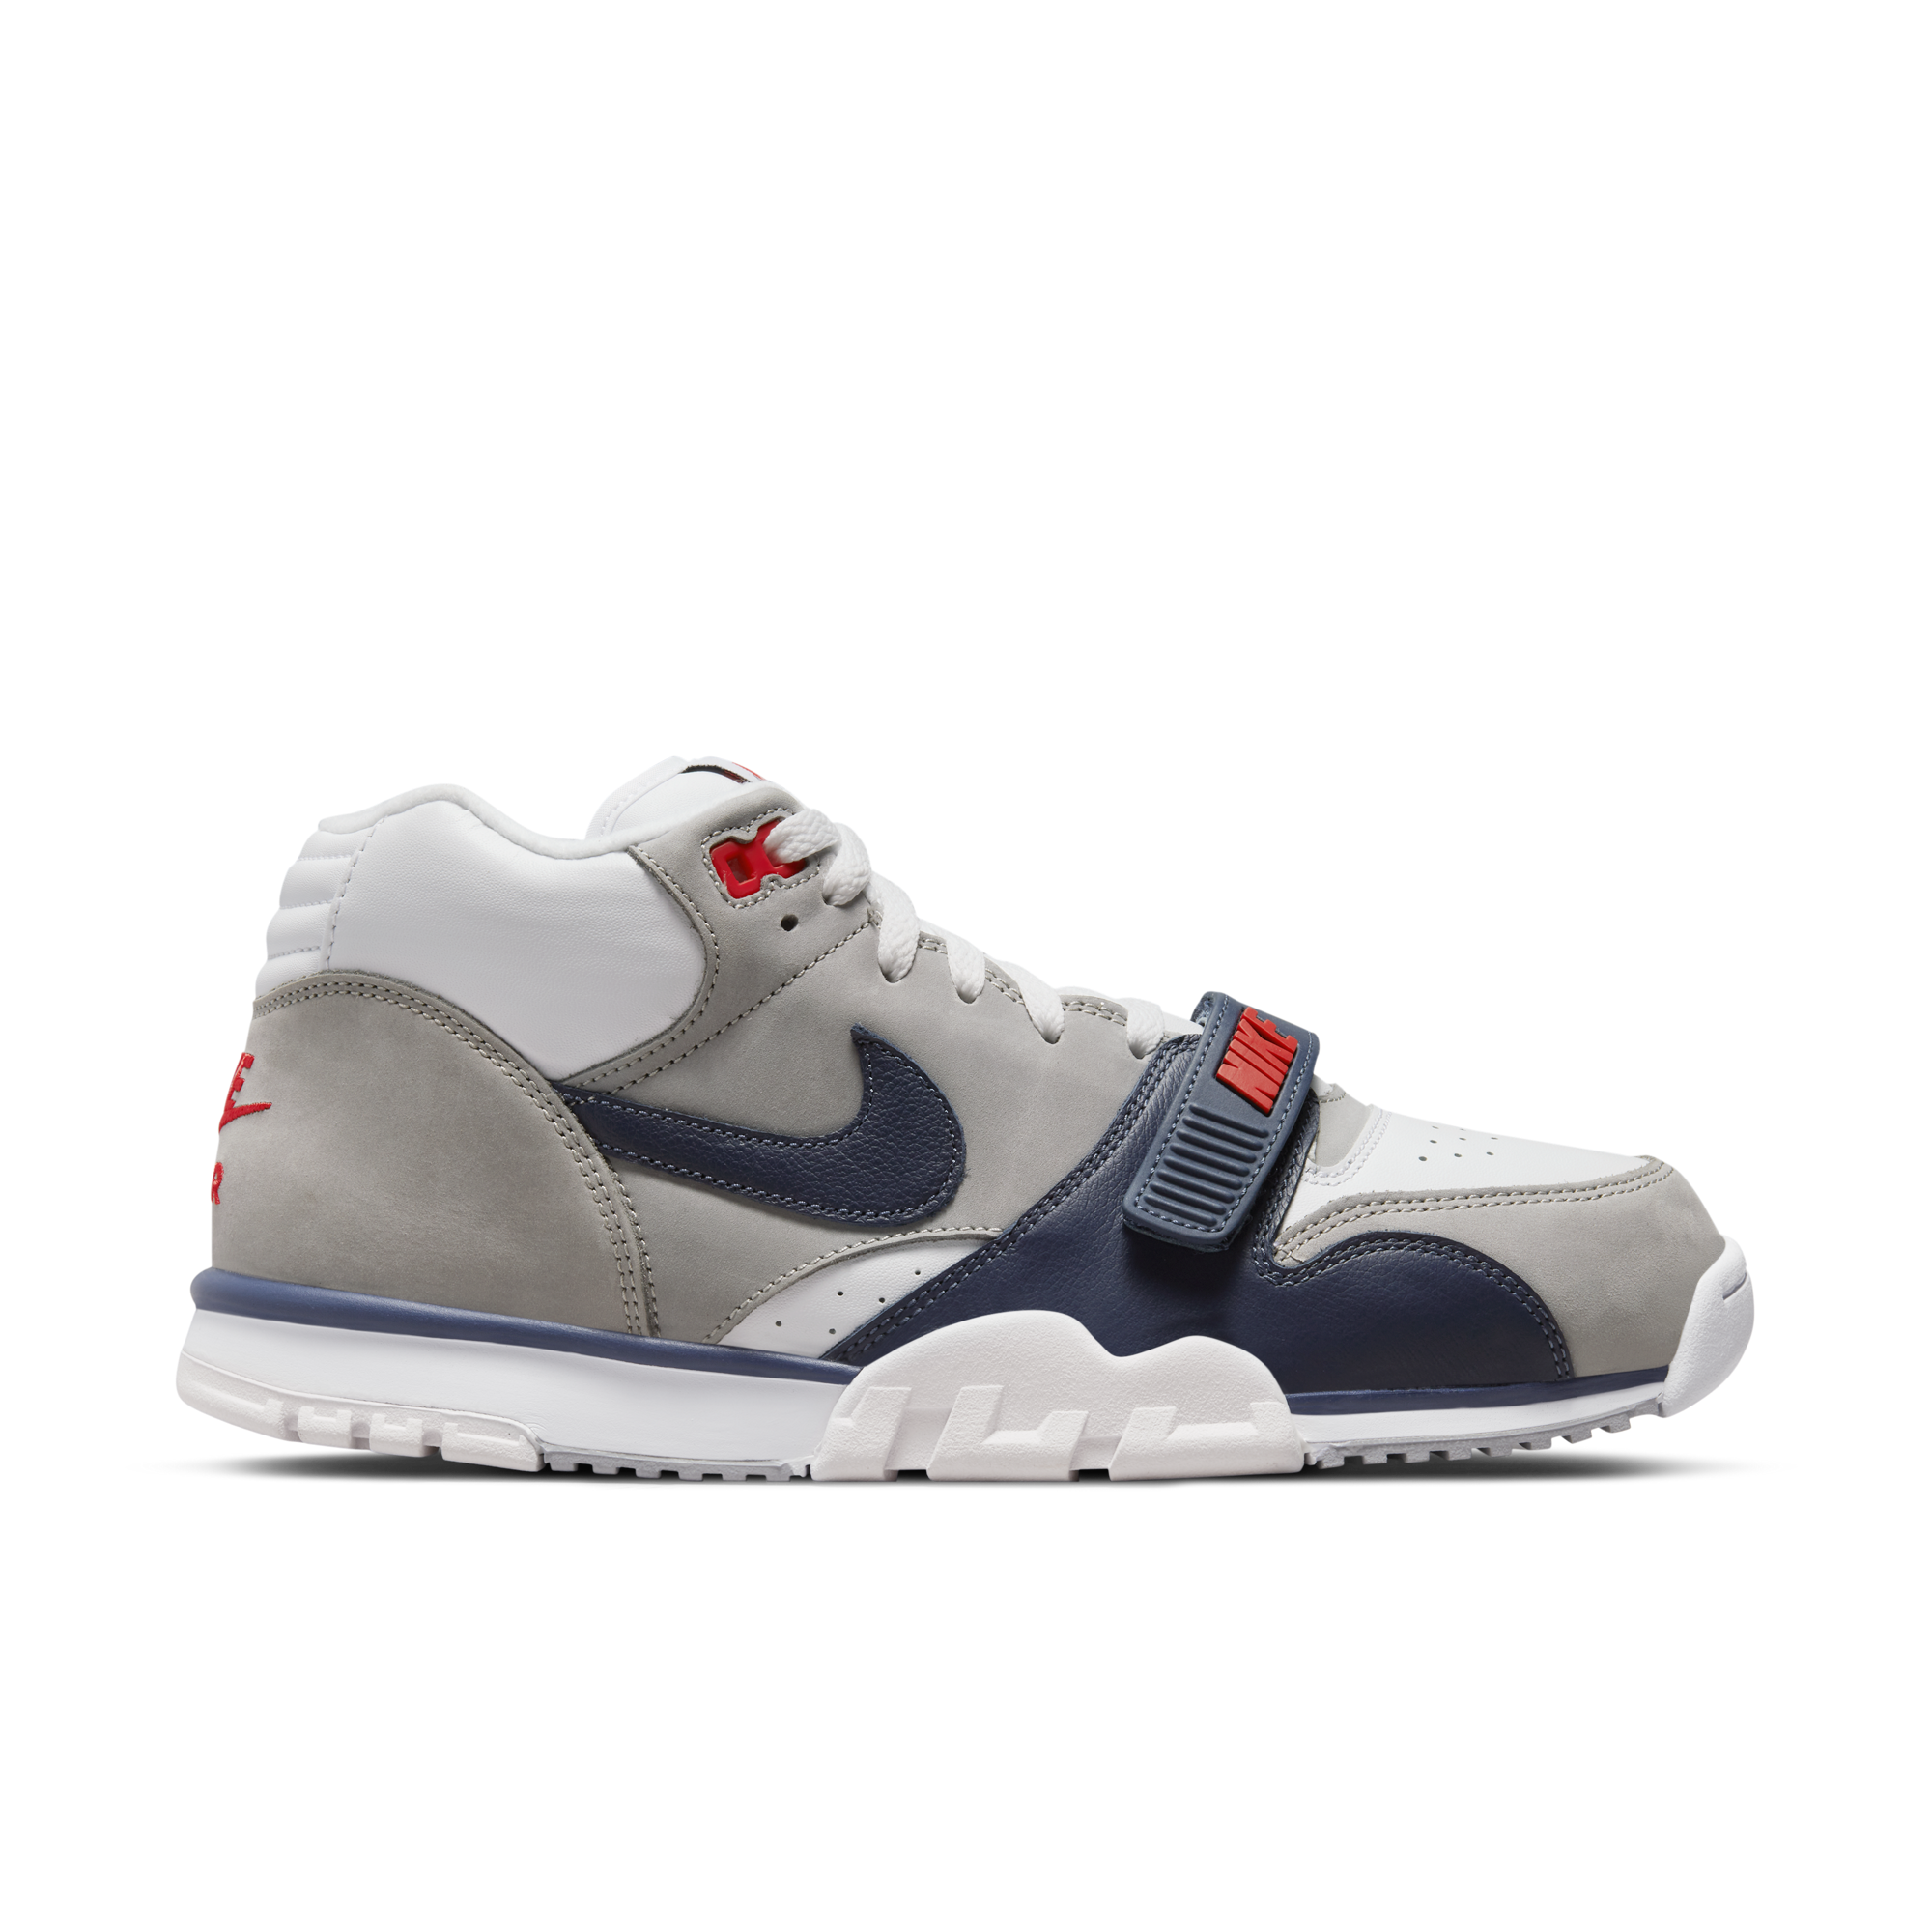 Nike Air Trainer 1 'Navy'